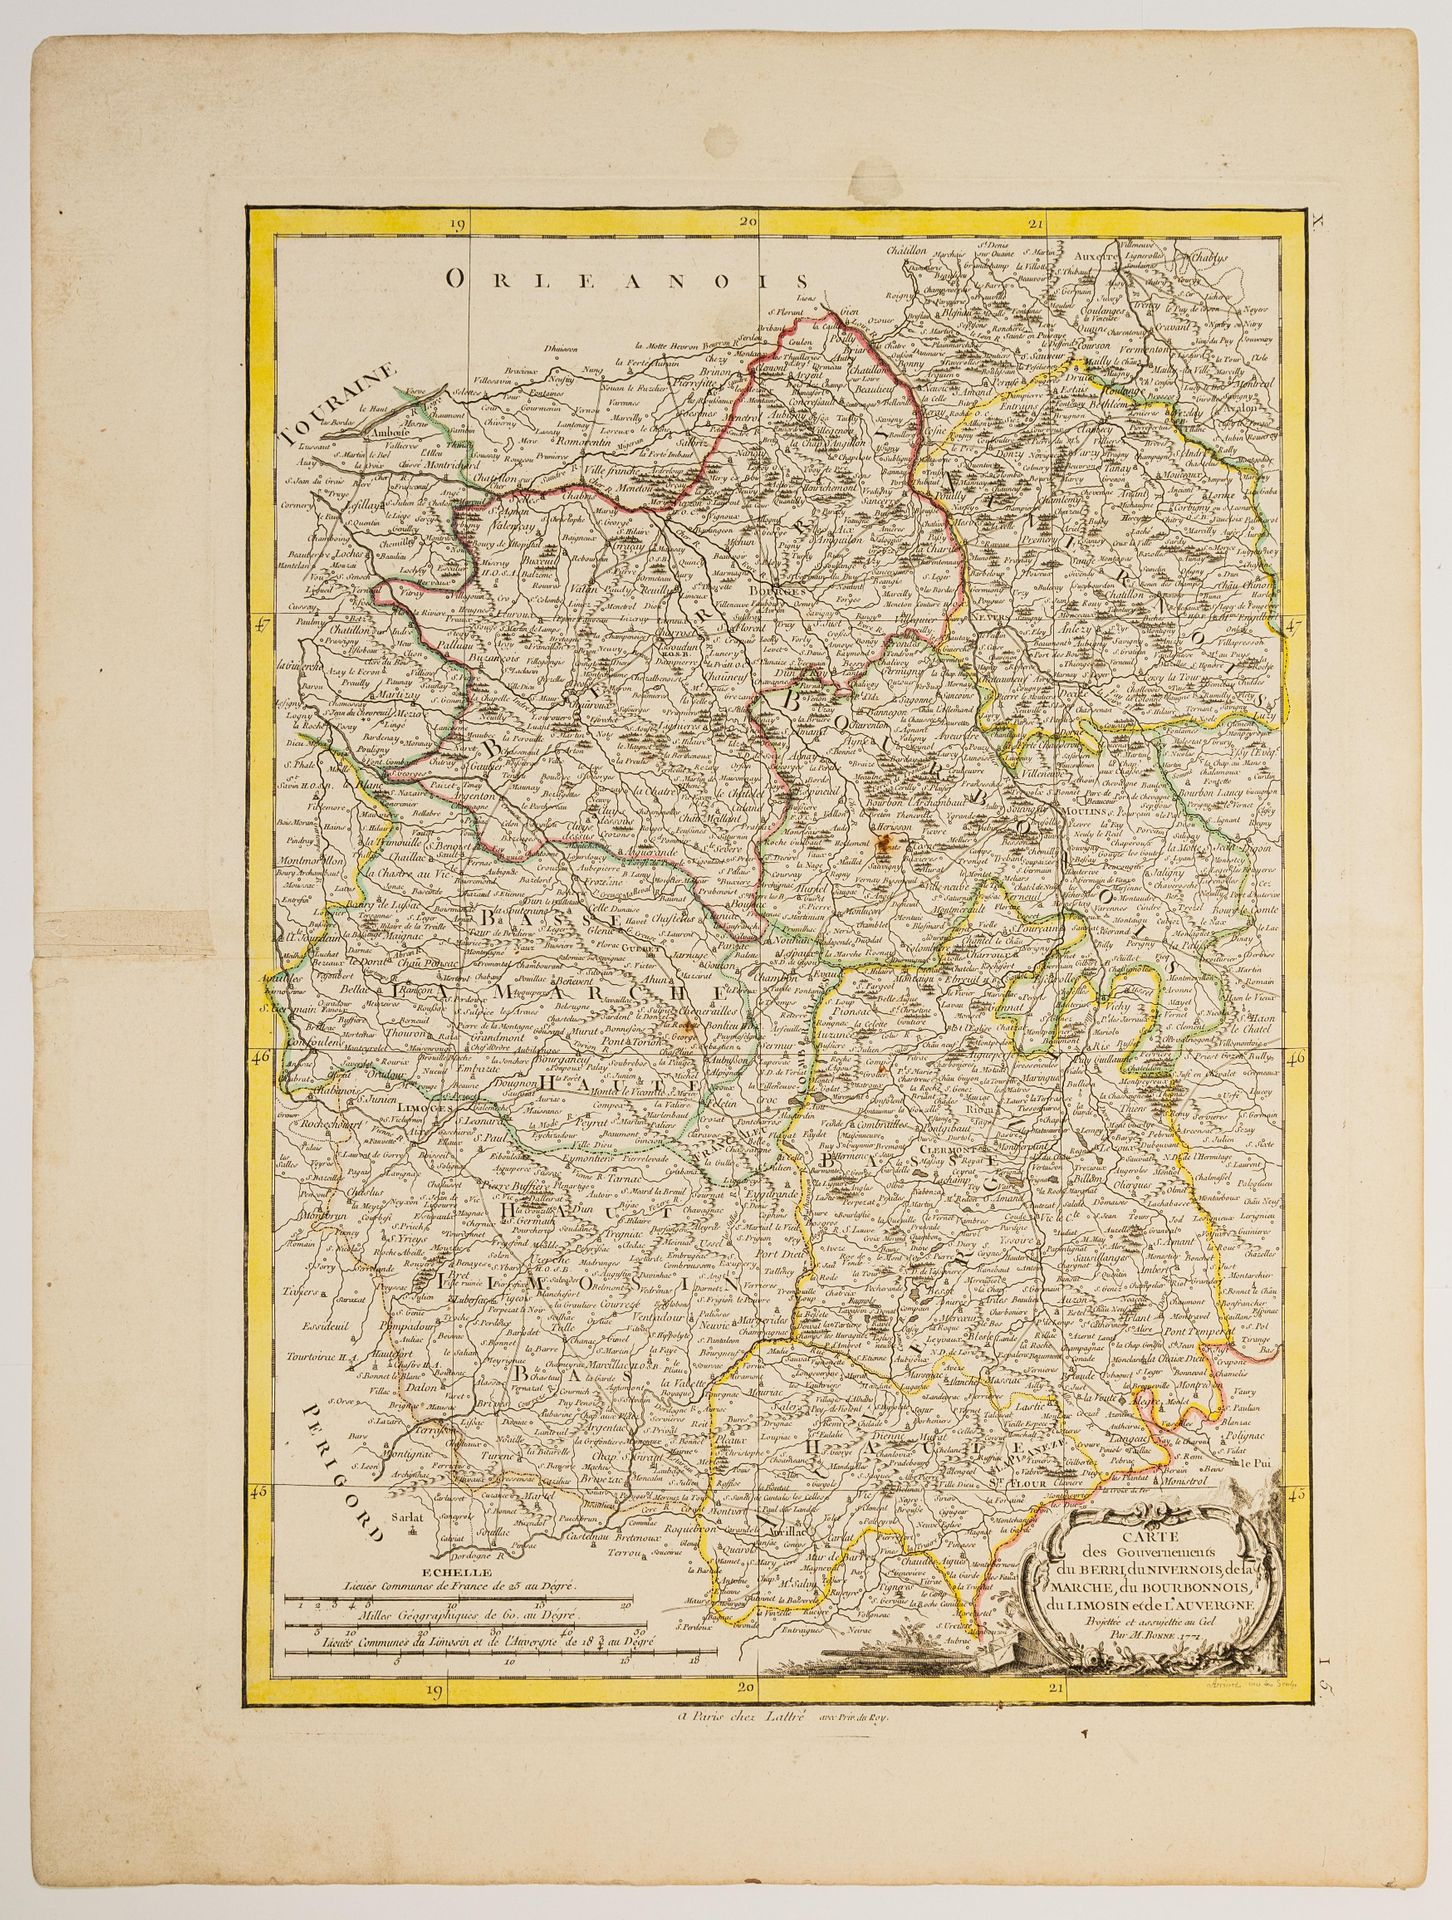 Null 81 - Map of the Governments of BERRI, NIVERNOIS, Marche, Bourbonnois, Limou&hellip;